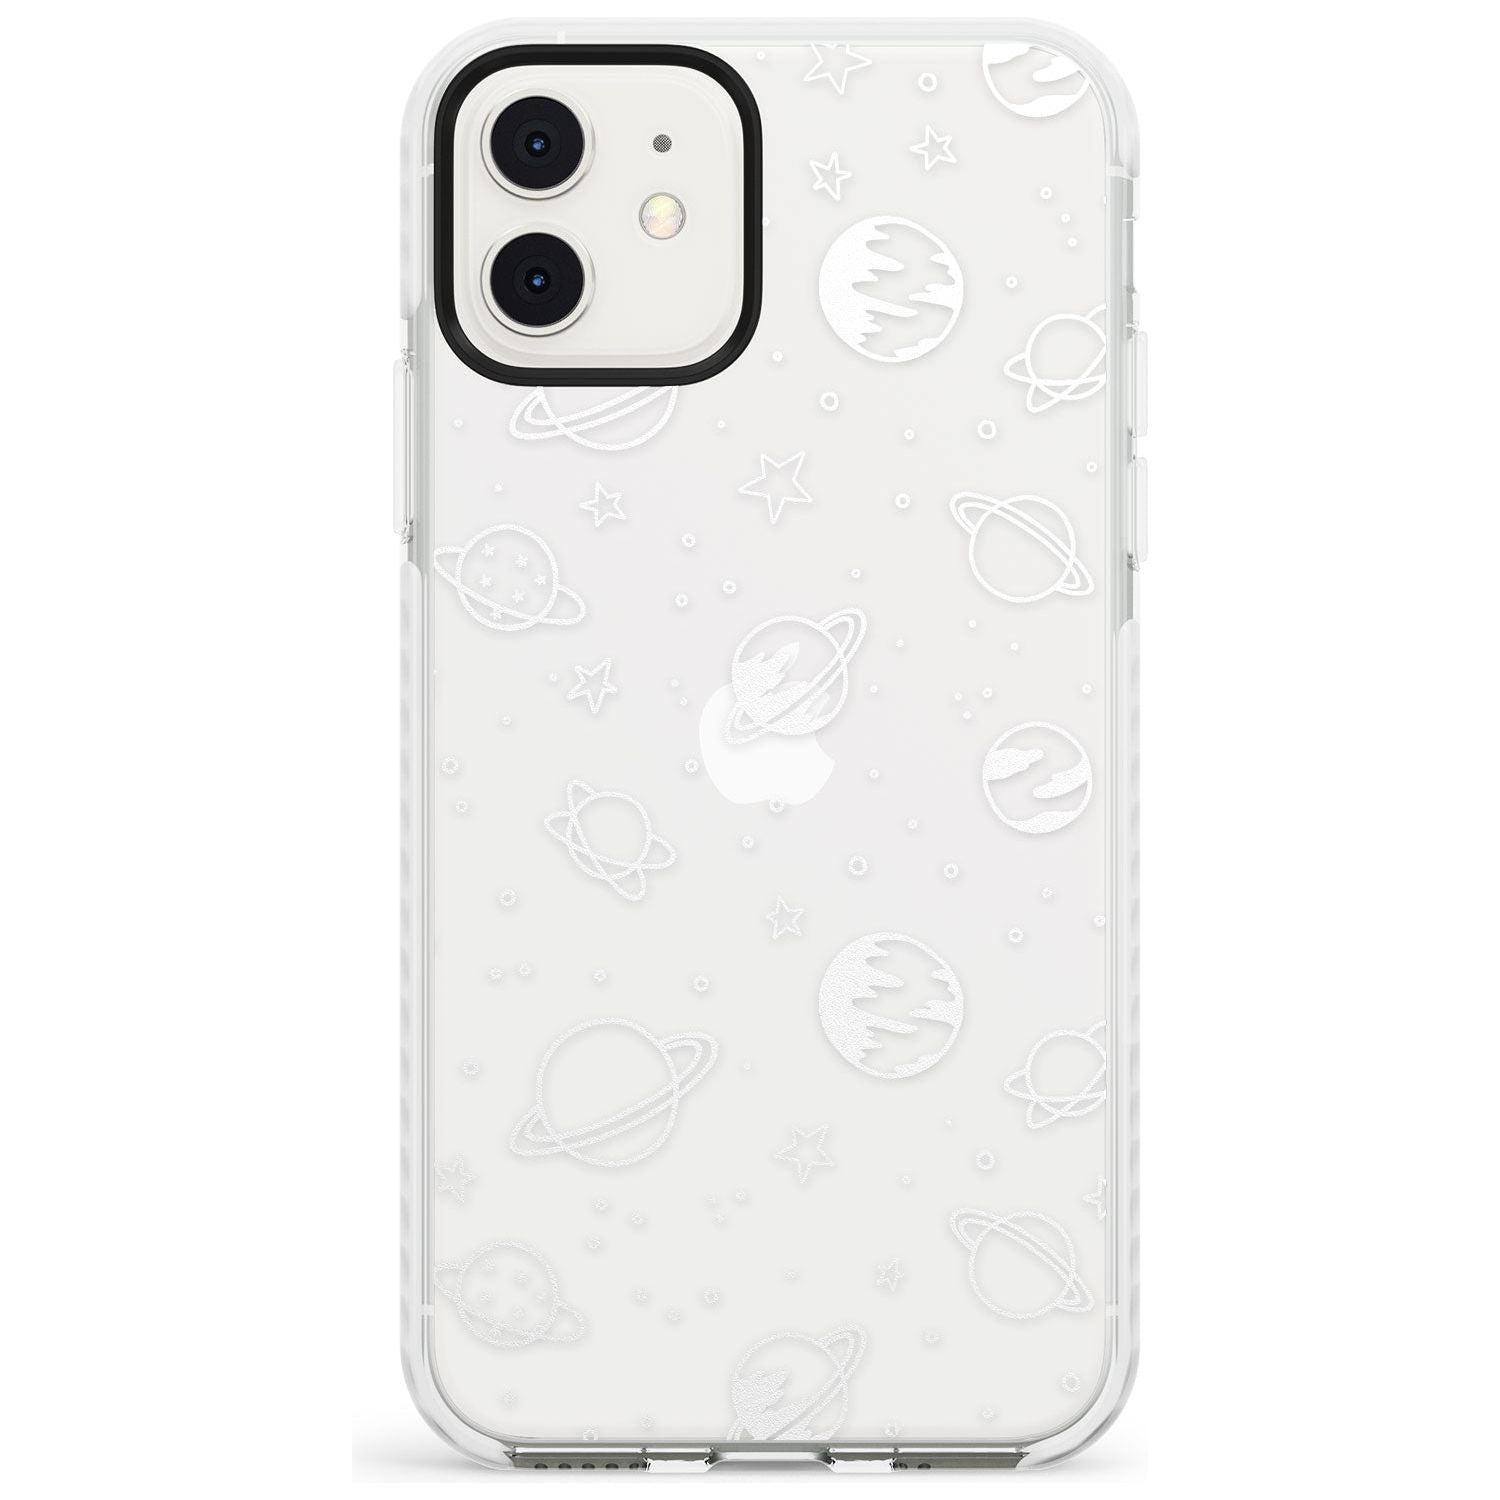 Outer Space Outlines: White on Clear Slim TPU Phone Case for iPhone 11